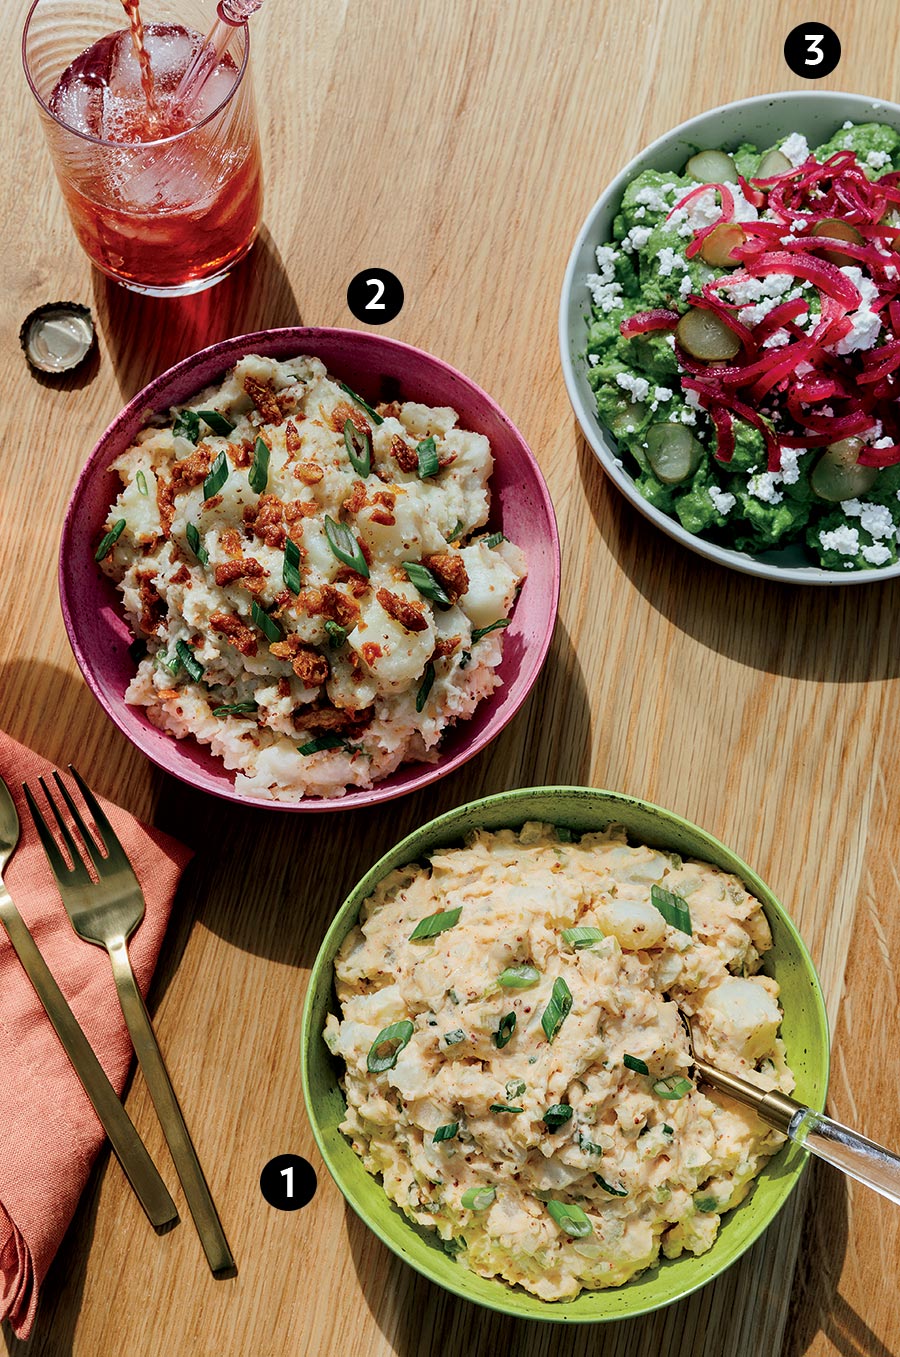 Galit’s Potato Salad, Schmaltzy Potato Salad With Gribenes and Mustard, and Herby Tahini Potato Salad With Bulgarian Feta and Too Many Pickles